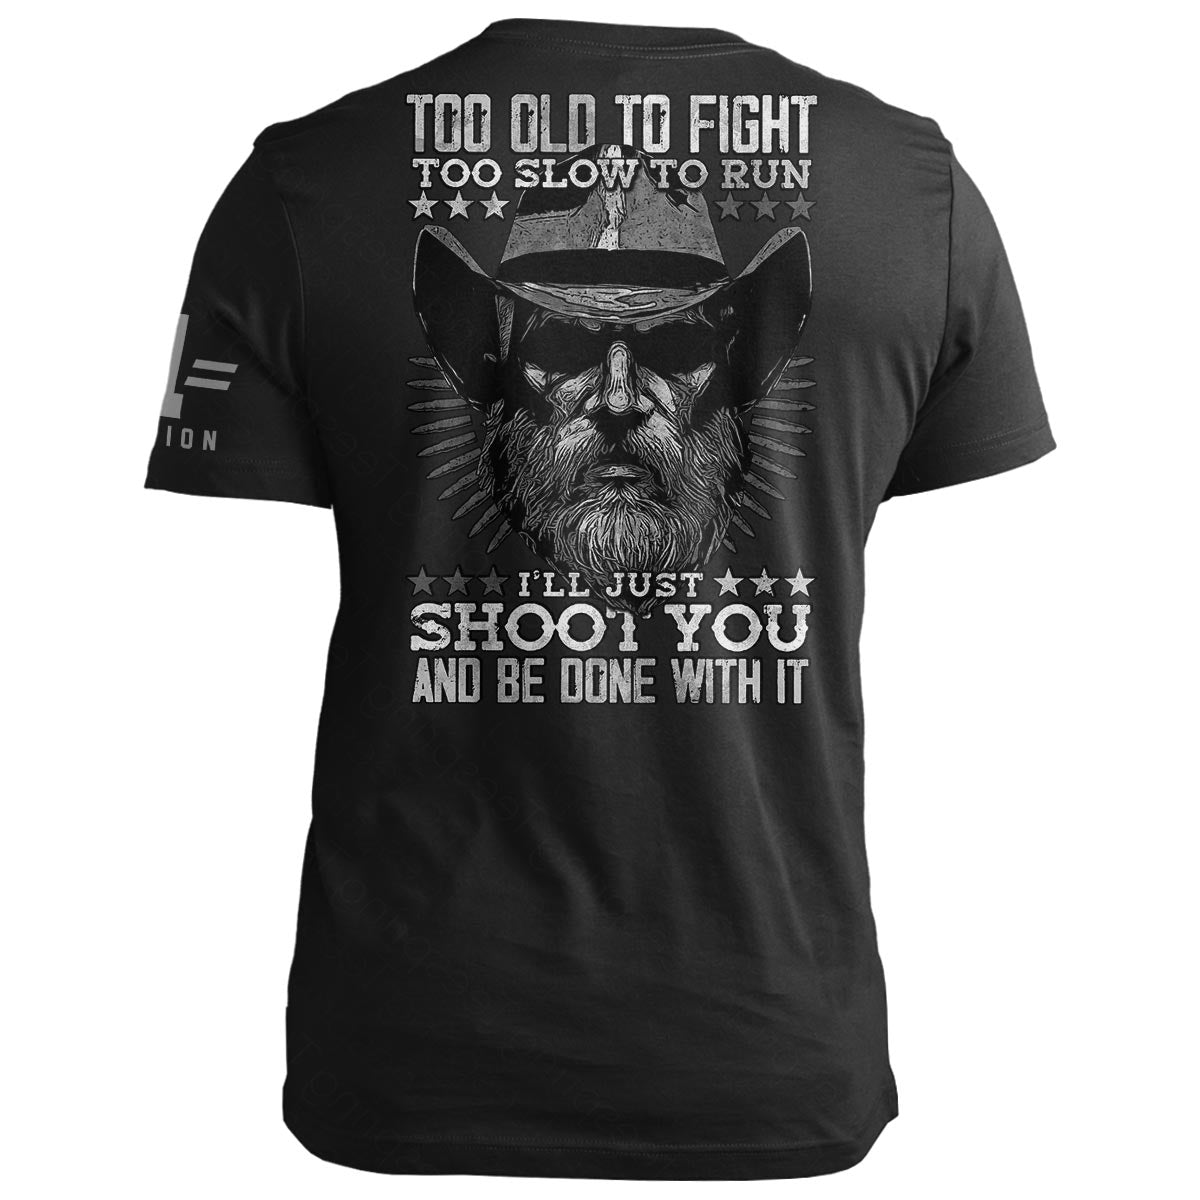 Too Old to Fight, Too Slow to Run